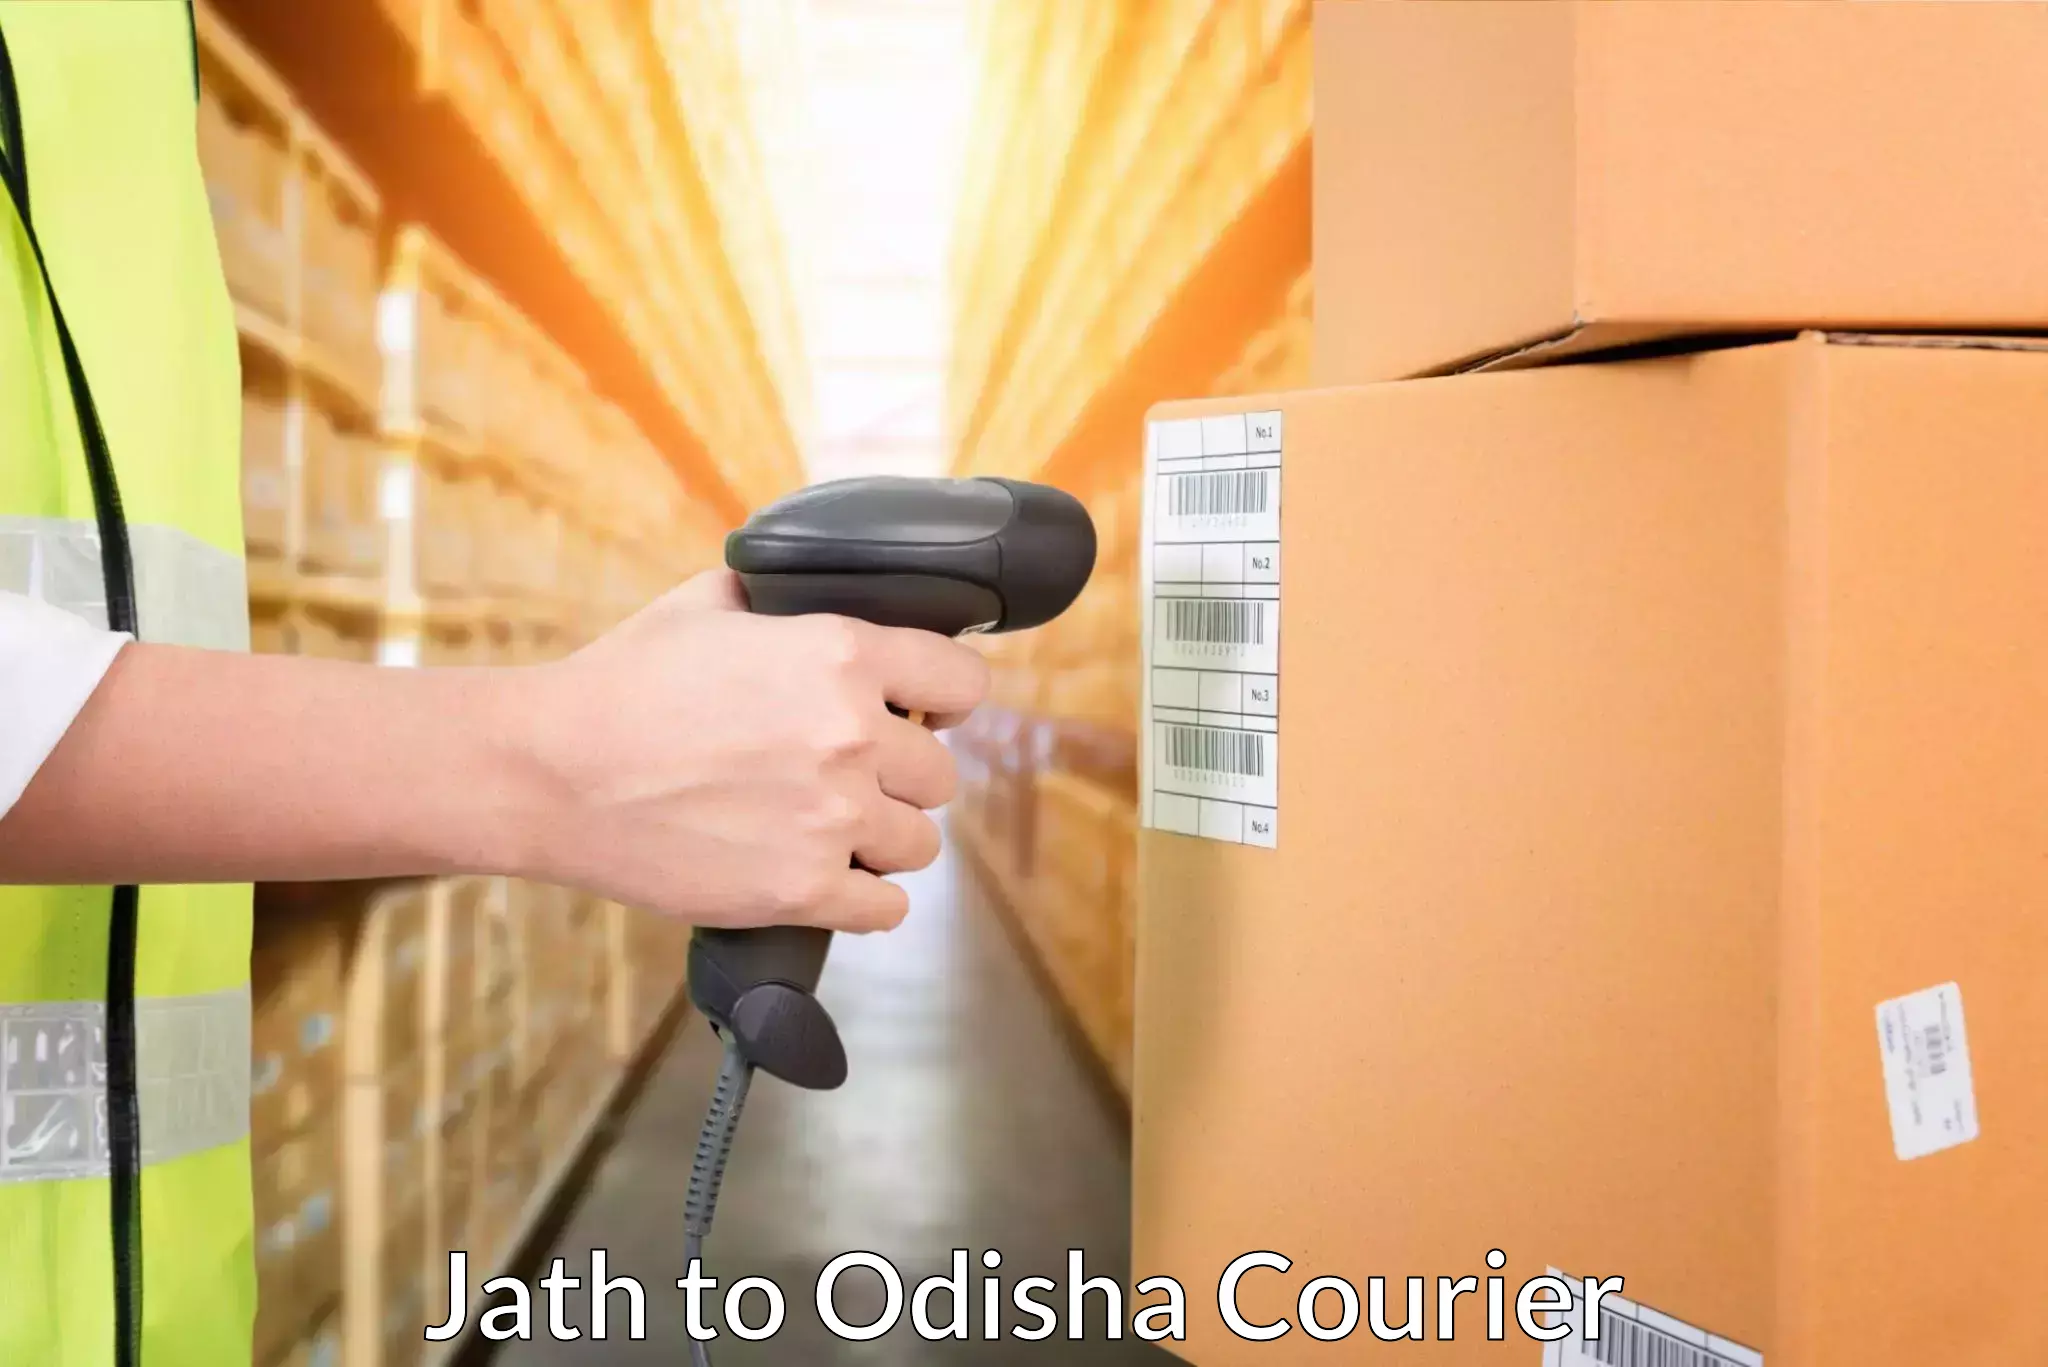 Global shipping solutions in Jath to Balugaon